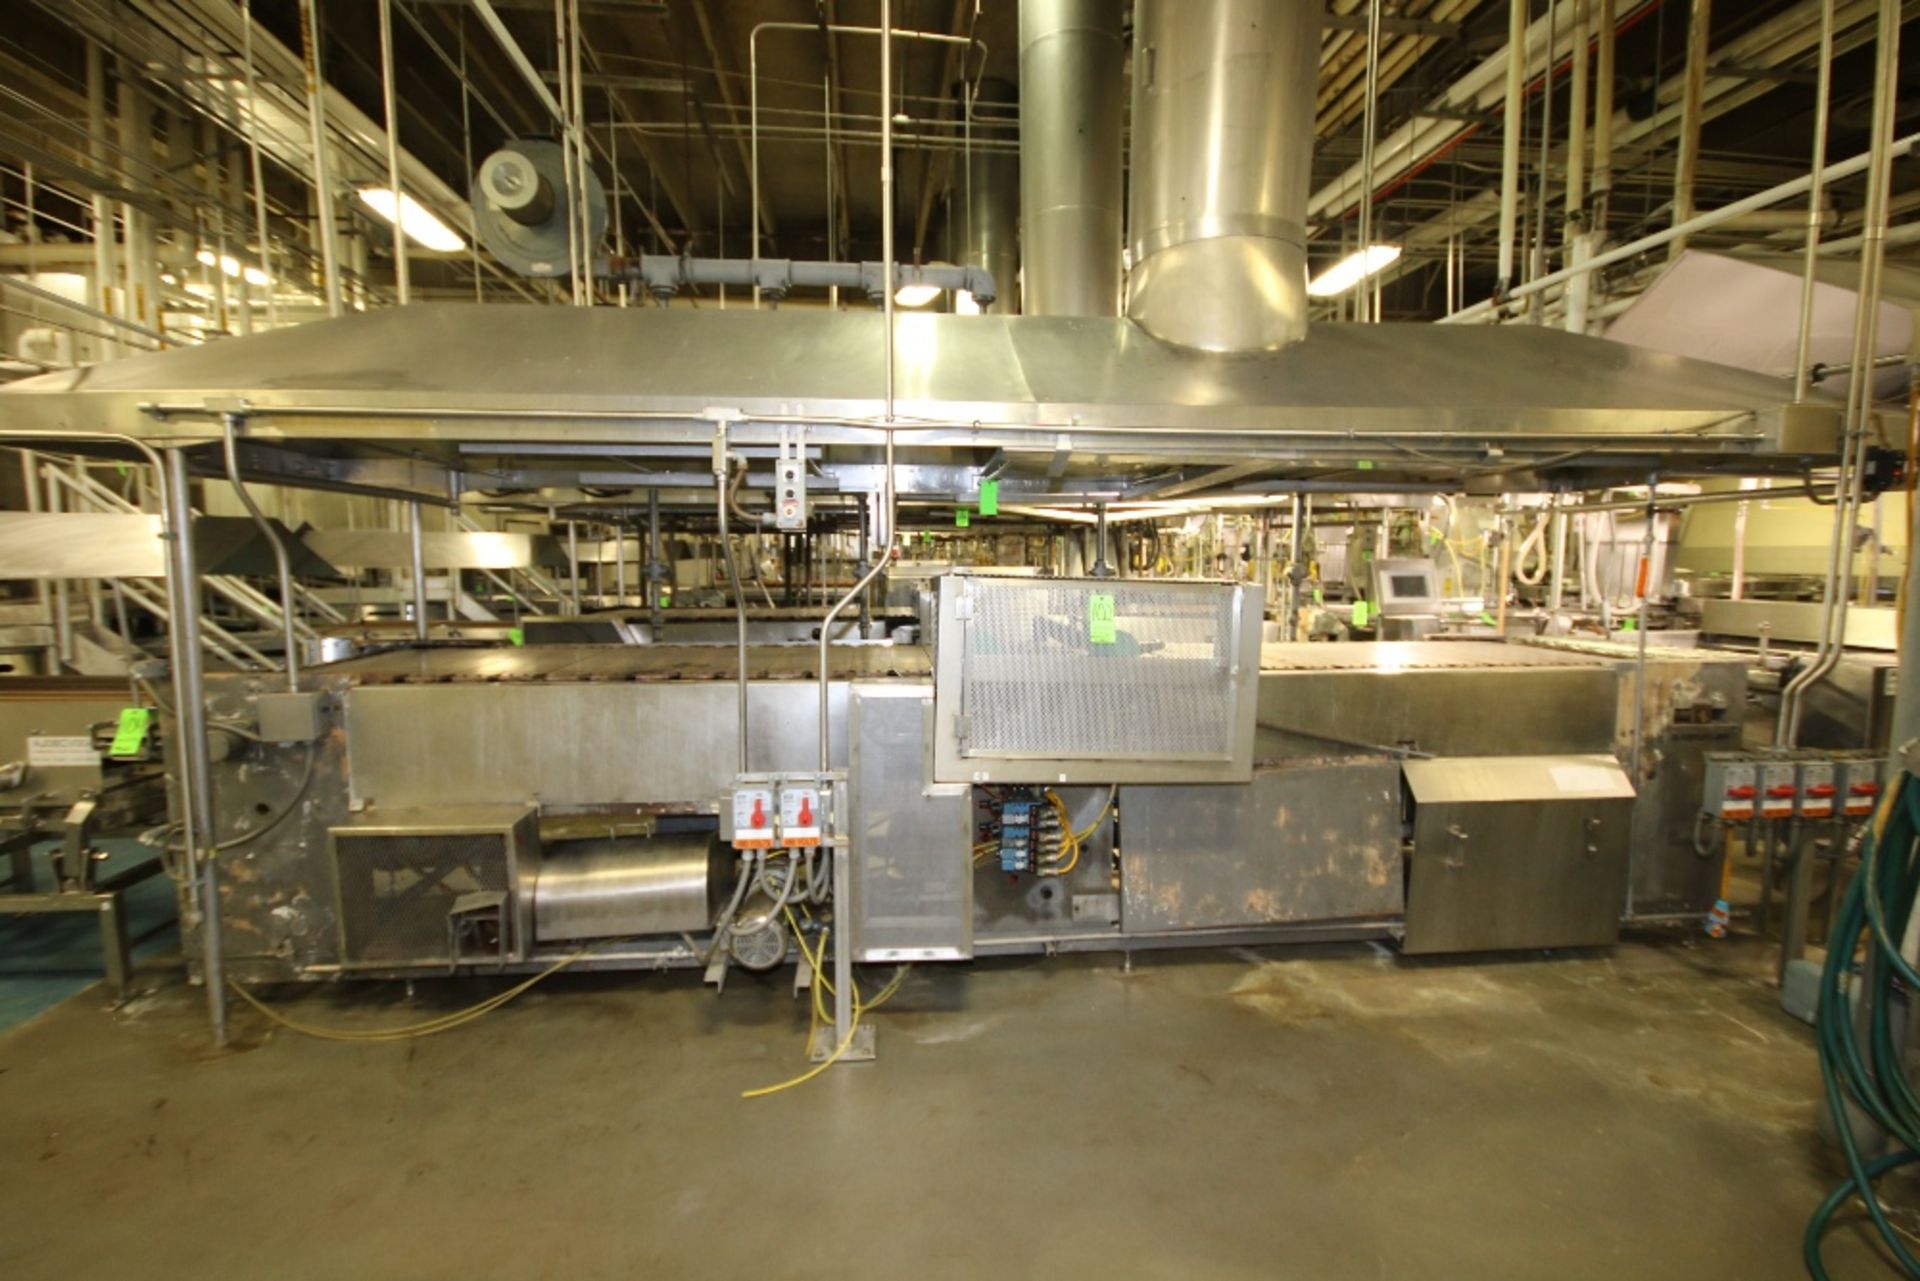 DeJersey Natural Gas Griddle/Oven with (76) 39" L Griddle Plates with Half Way Point Flipping - Image 2 of 4